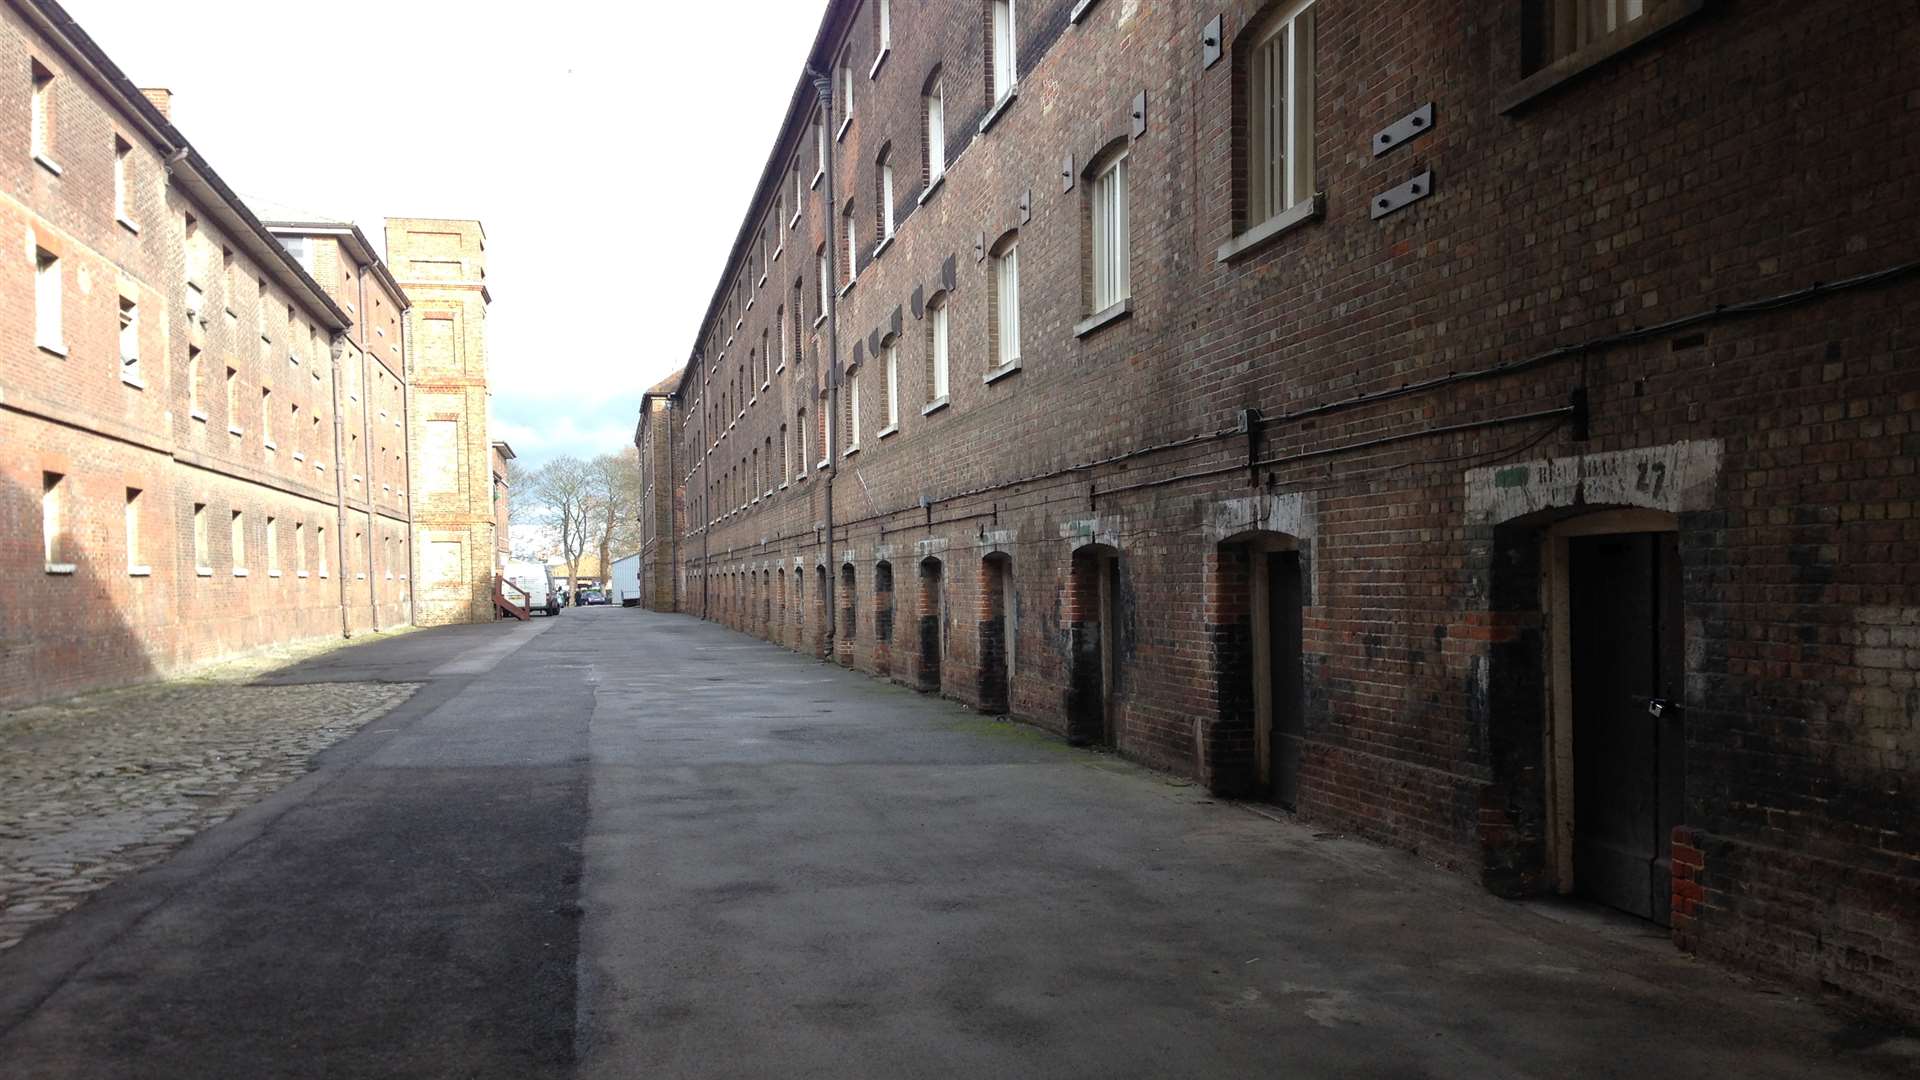 One of Chatham Historic Dockyard's filming spots for Call the Midwife